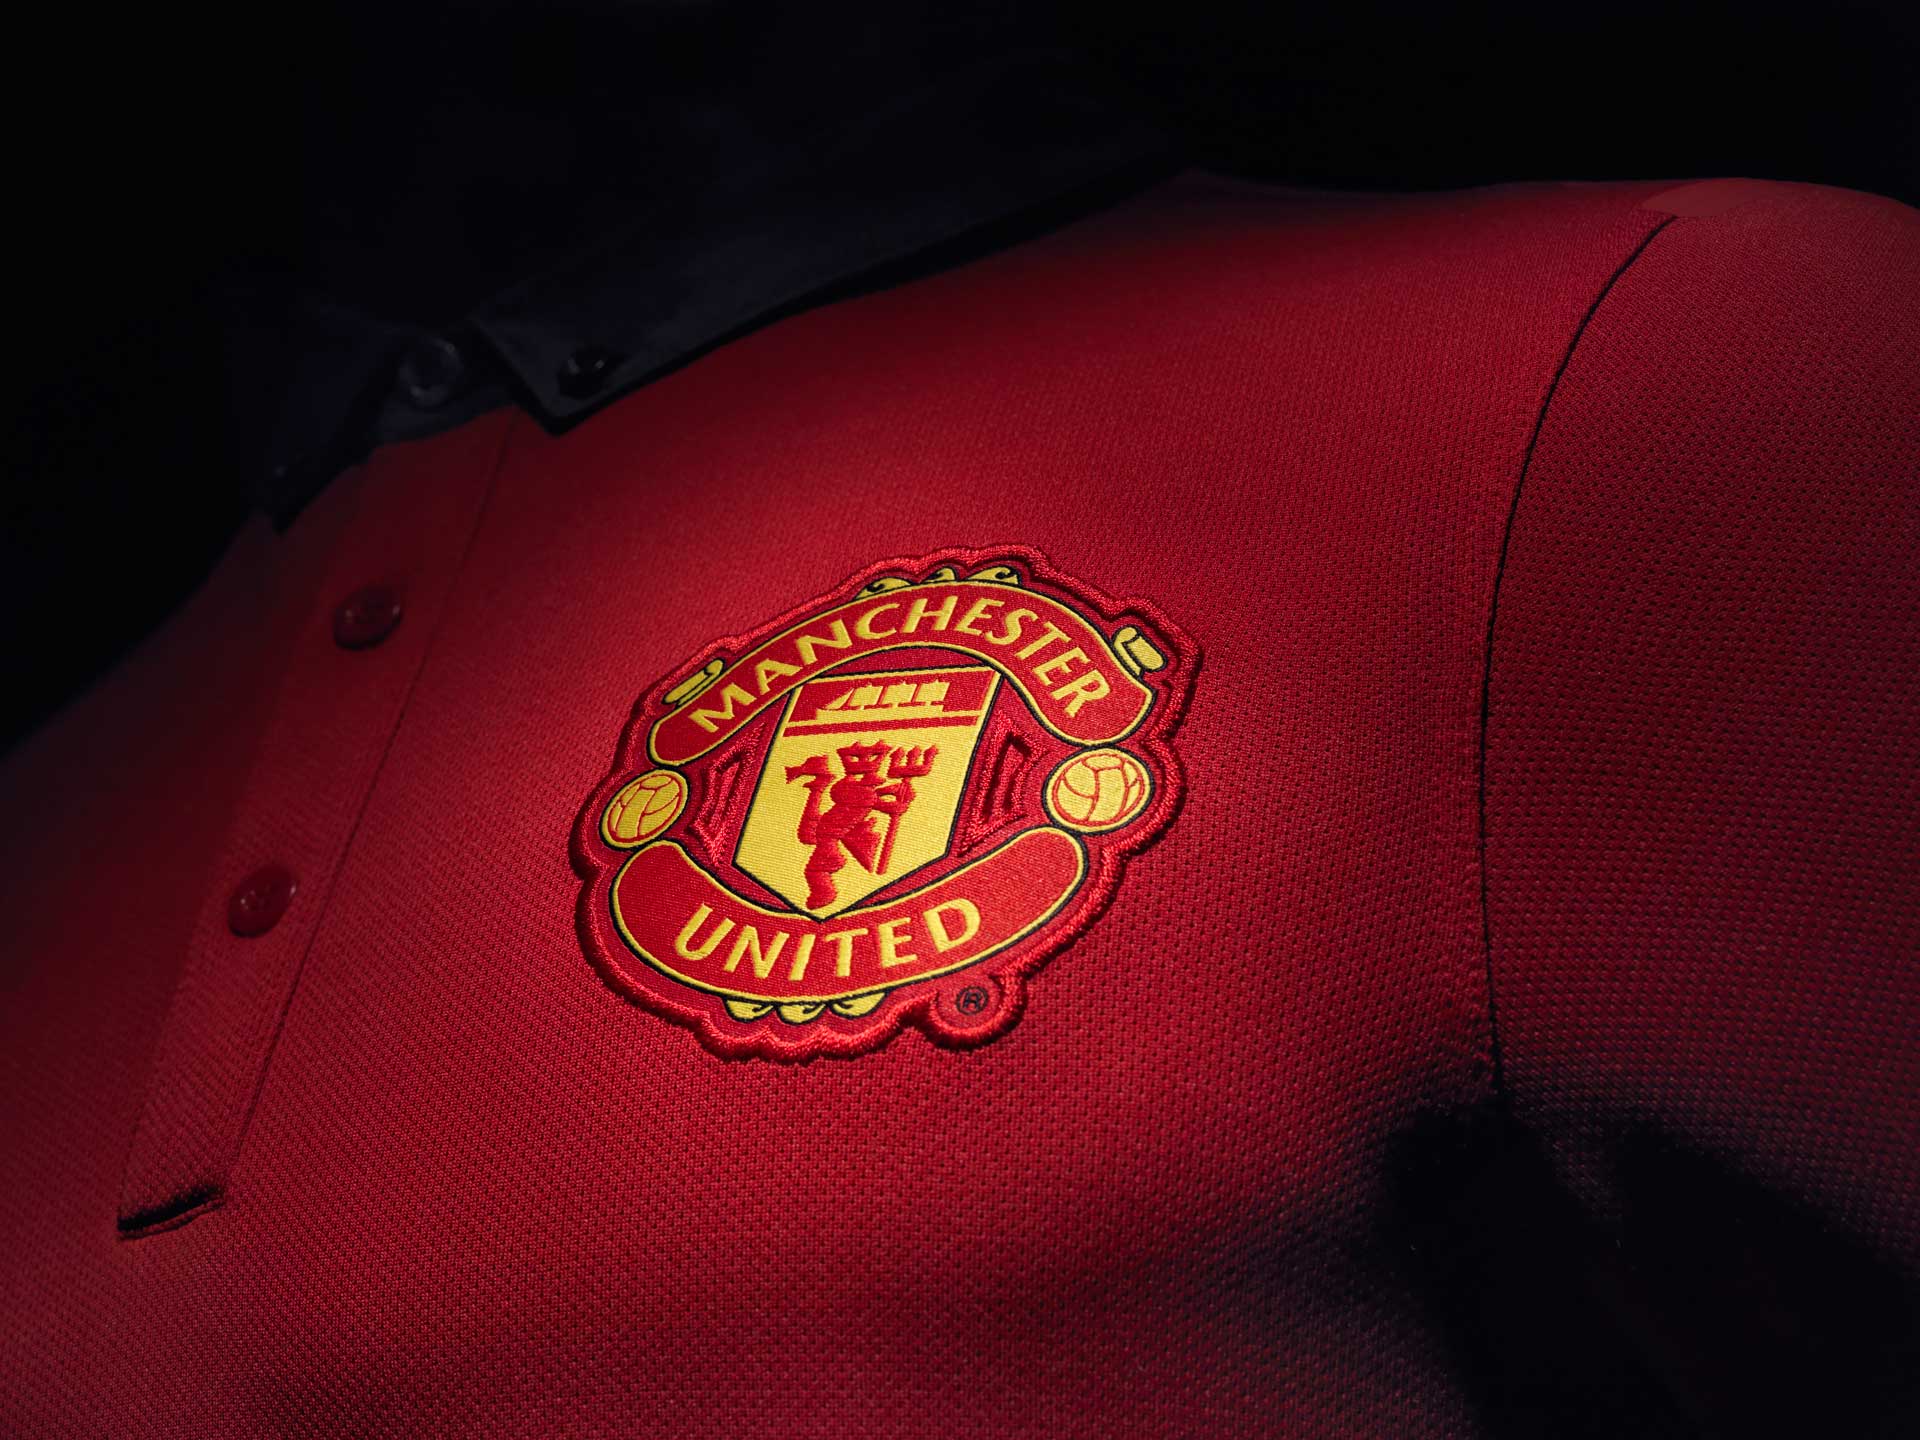 Manchester United crest logo in the jersey 2014 2015 wallpaper 1920x1440